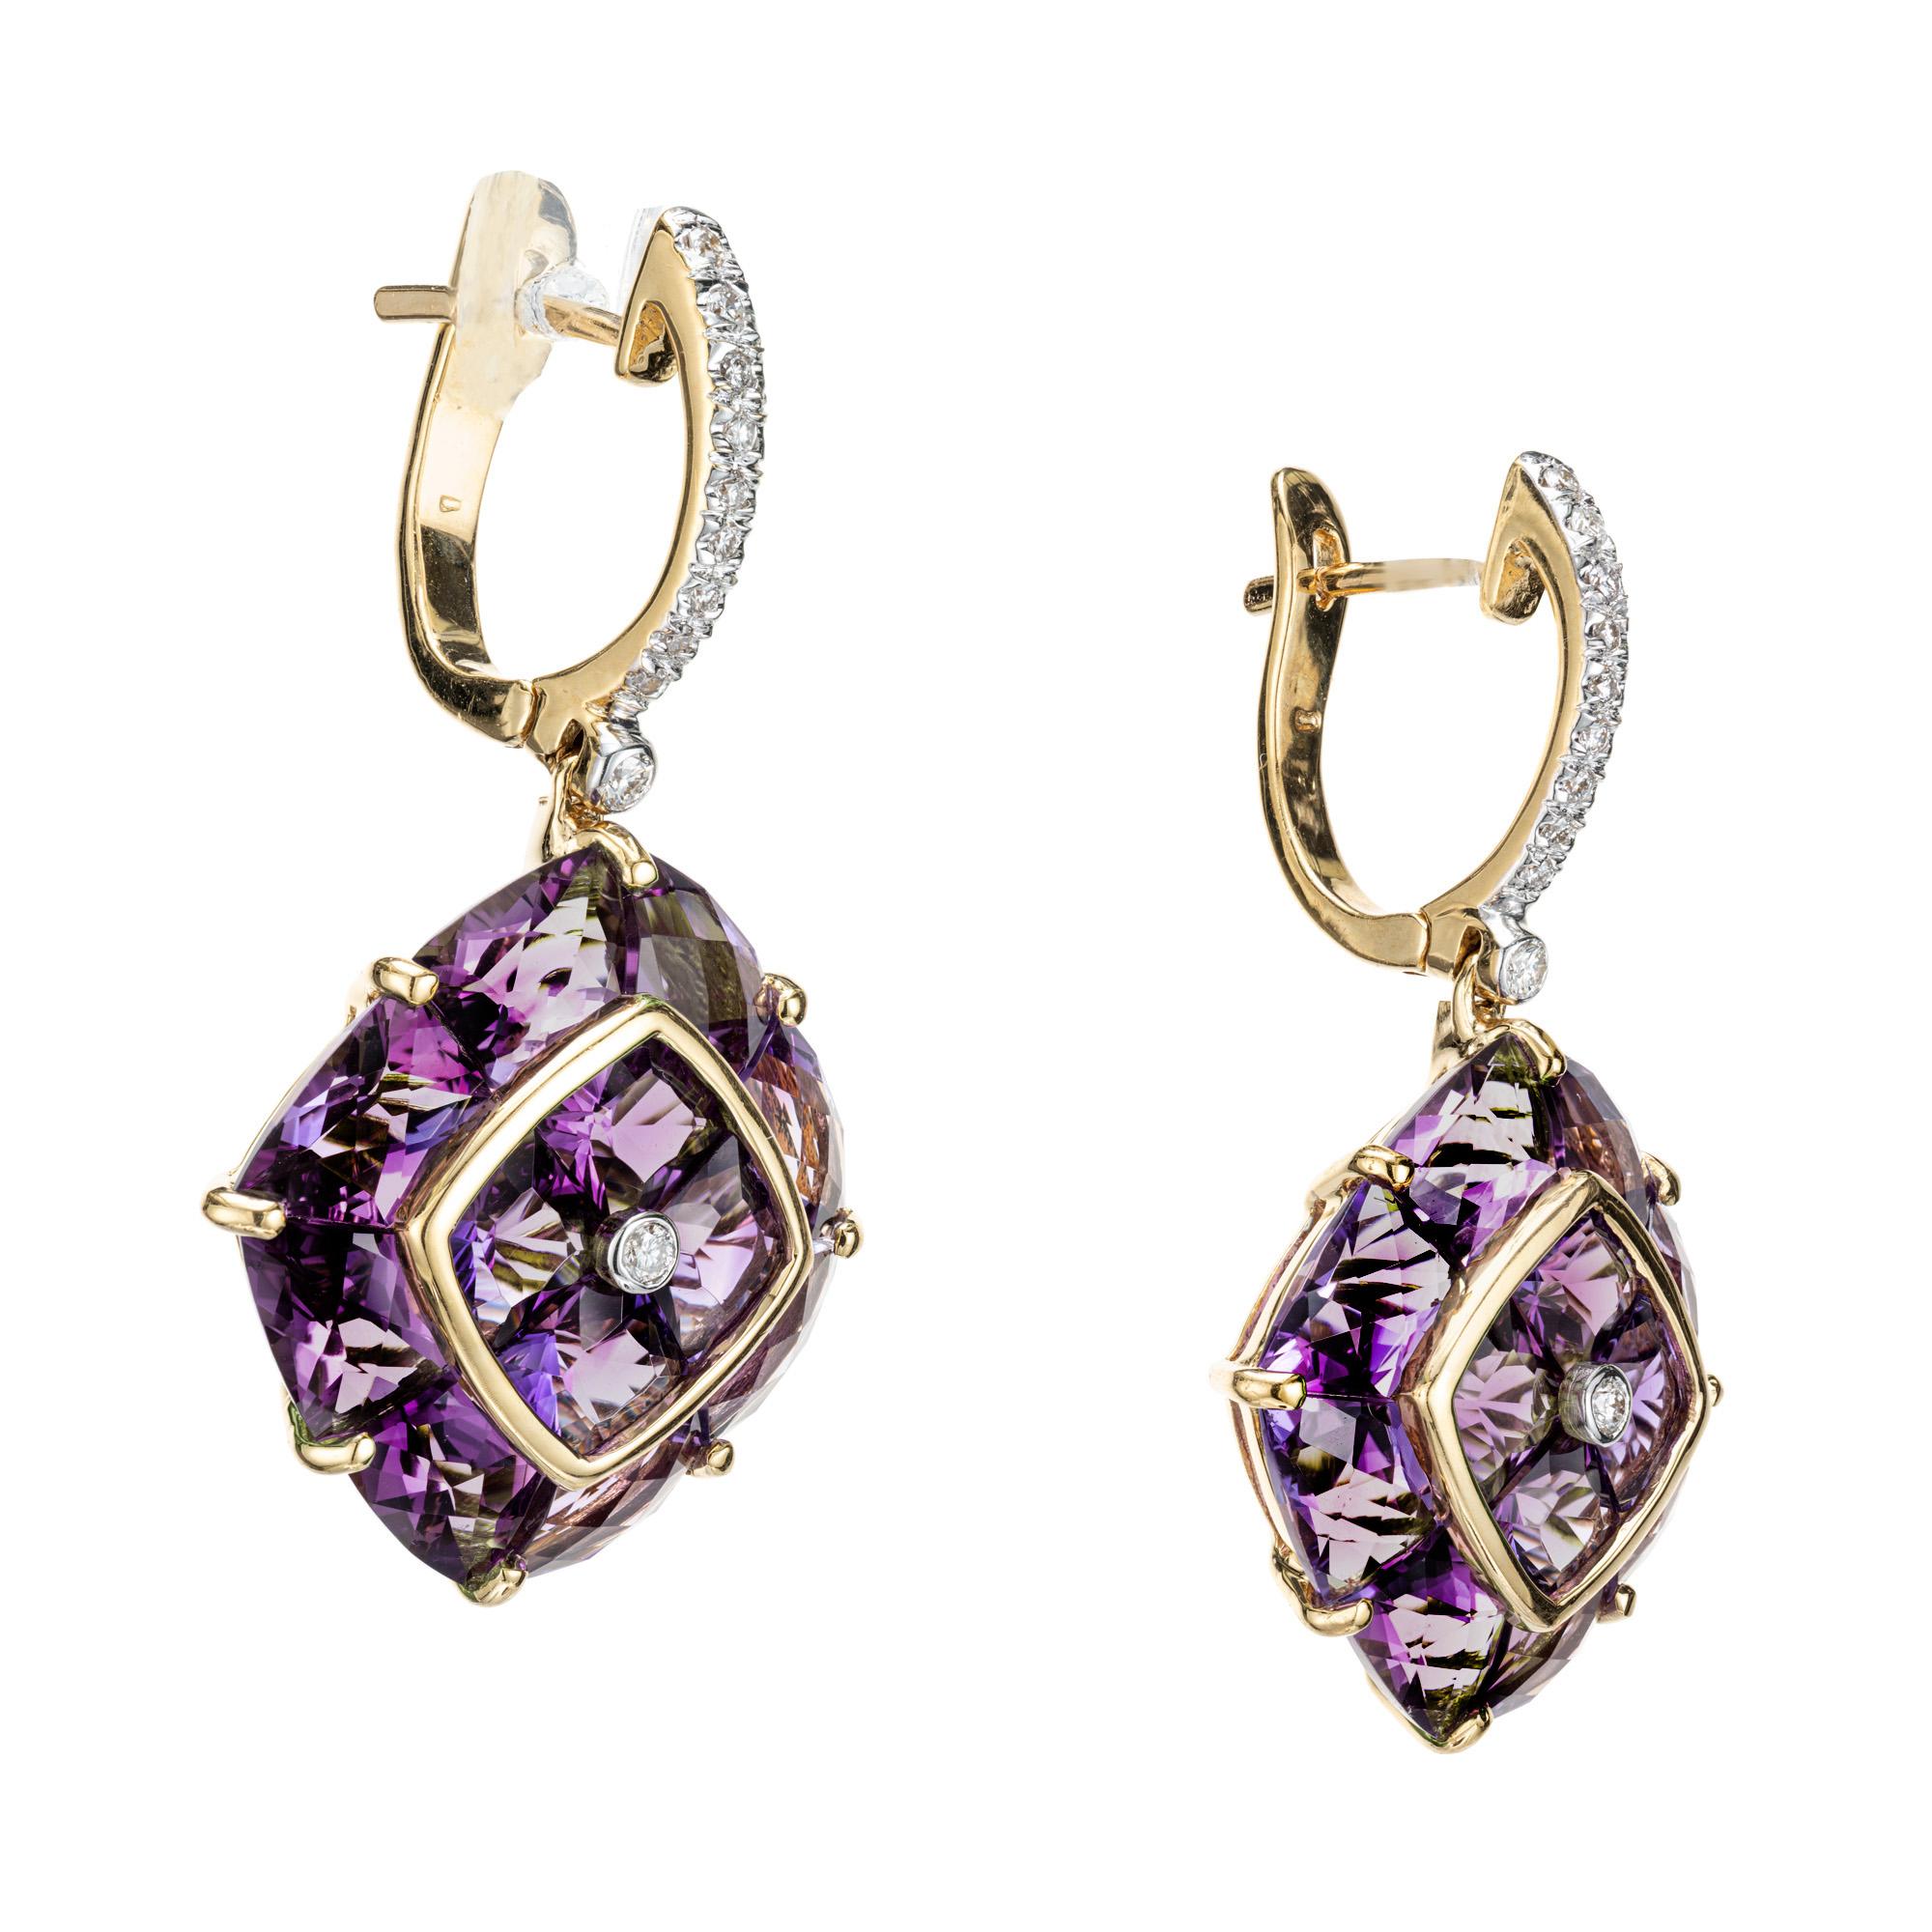 Amethyst and diamond dangle earrings from Bellarri Hava collection.  24 custom cut bright purple amethysts set in 18k yellow gold with 22 round full cut diamonds. 

24 custom cut bright purple Amethyst, approx. total weight 13.43cts, VS
22 round